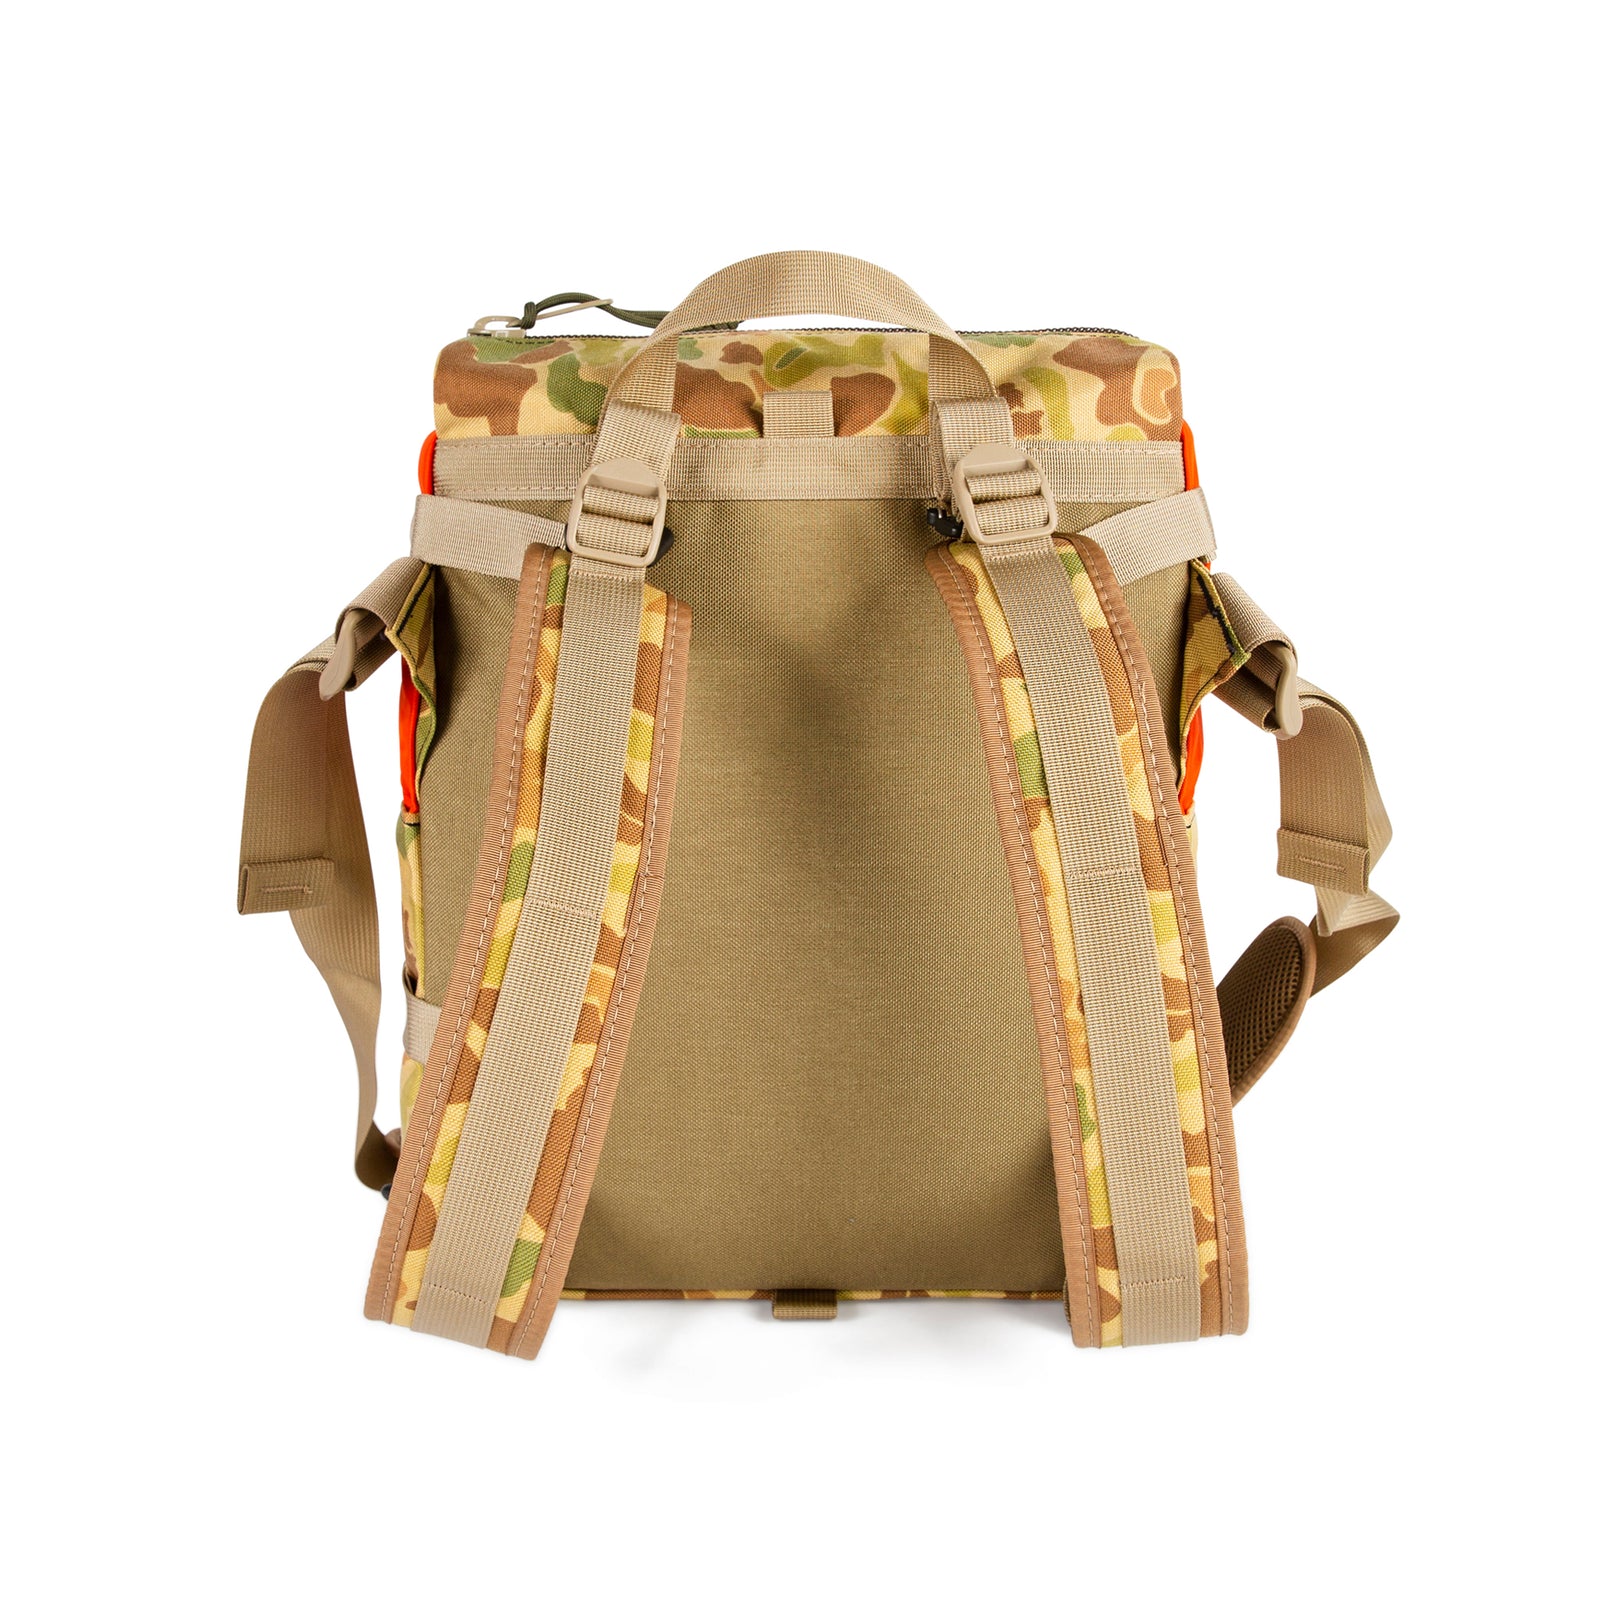 Back product shot of Topo Designs x Nanga x Natal Designs Rover Shoulder Bag in Camo showing backpack straps.